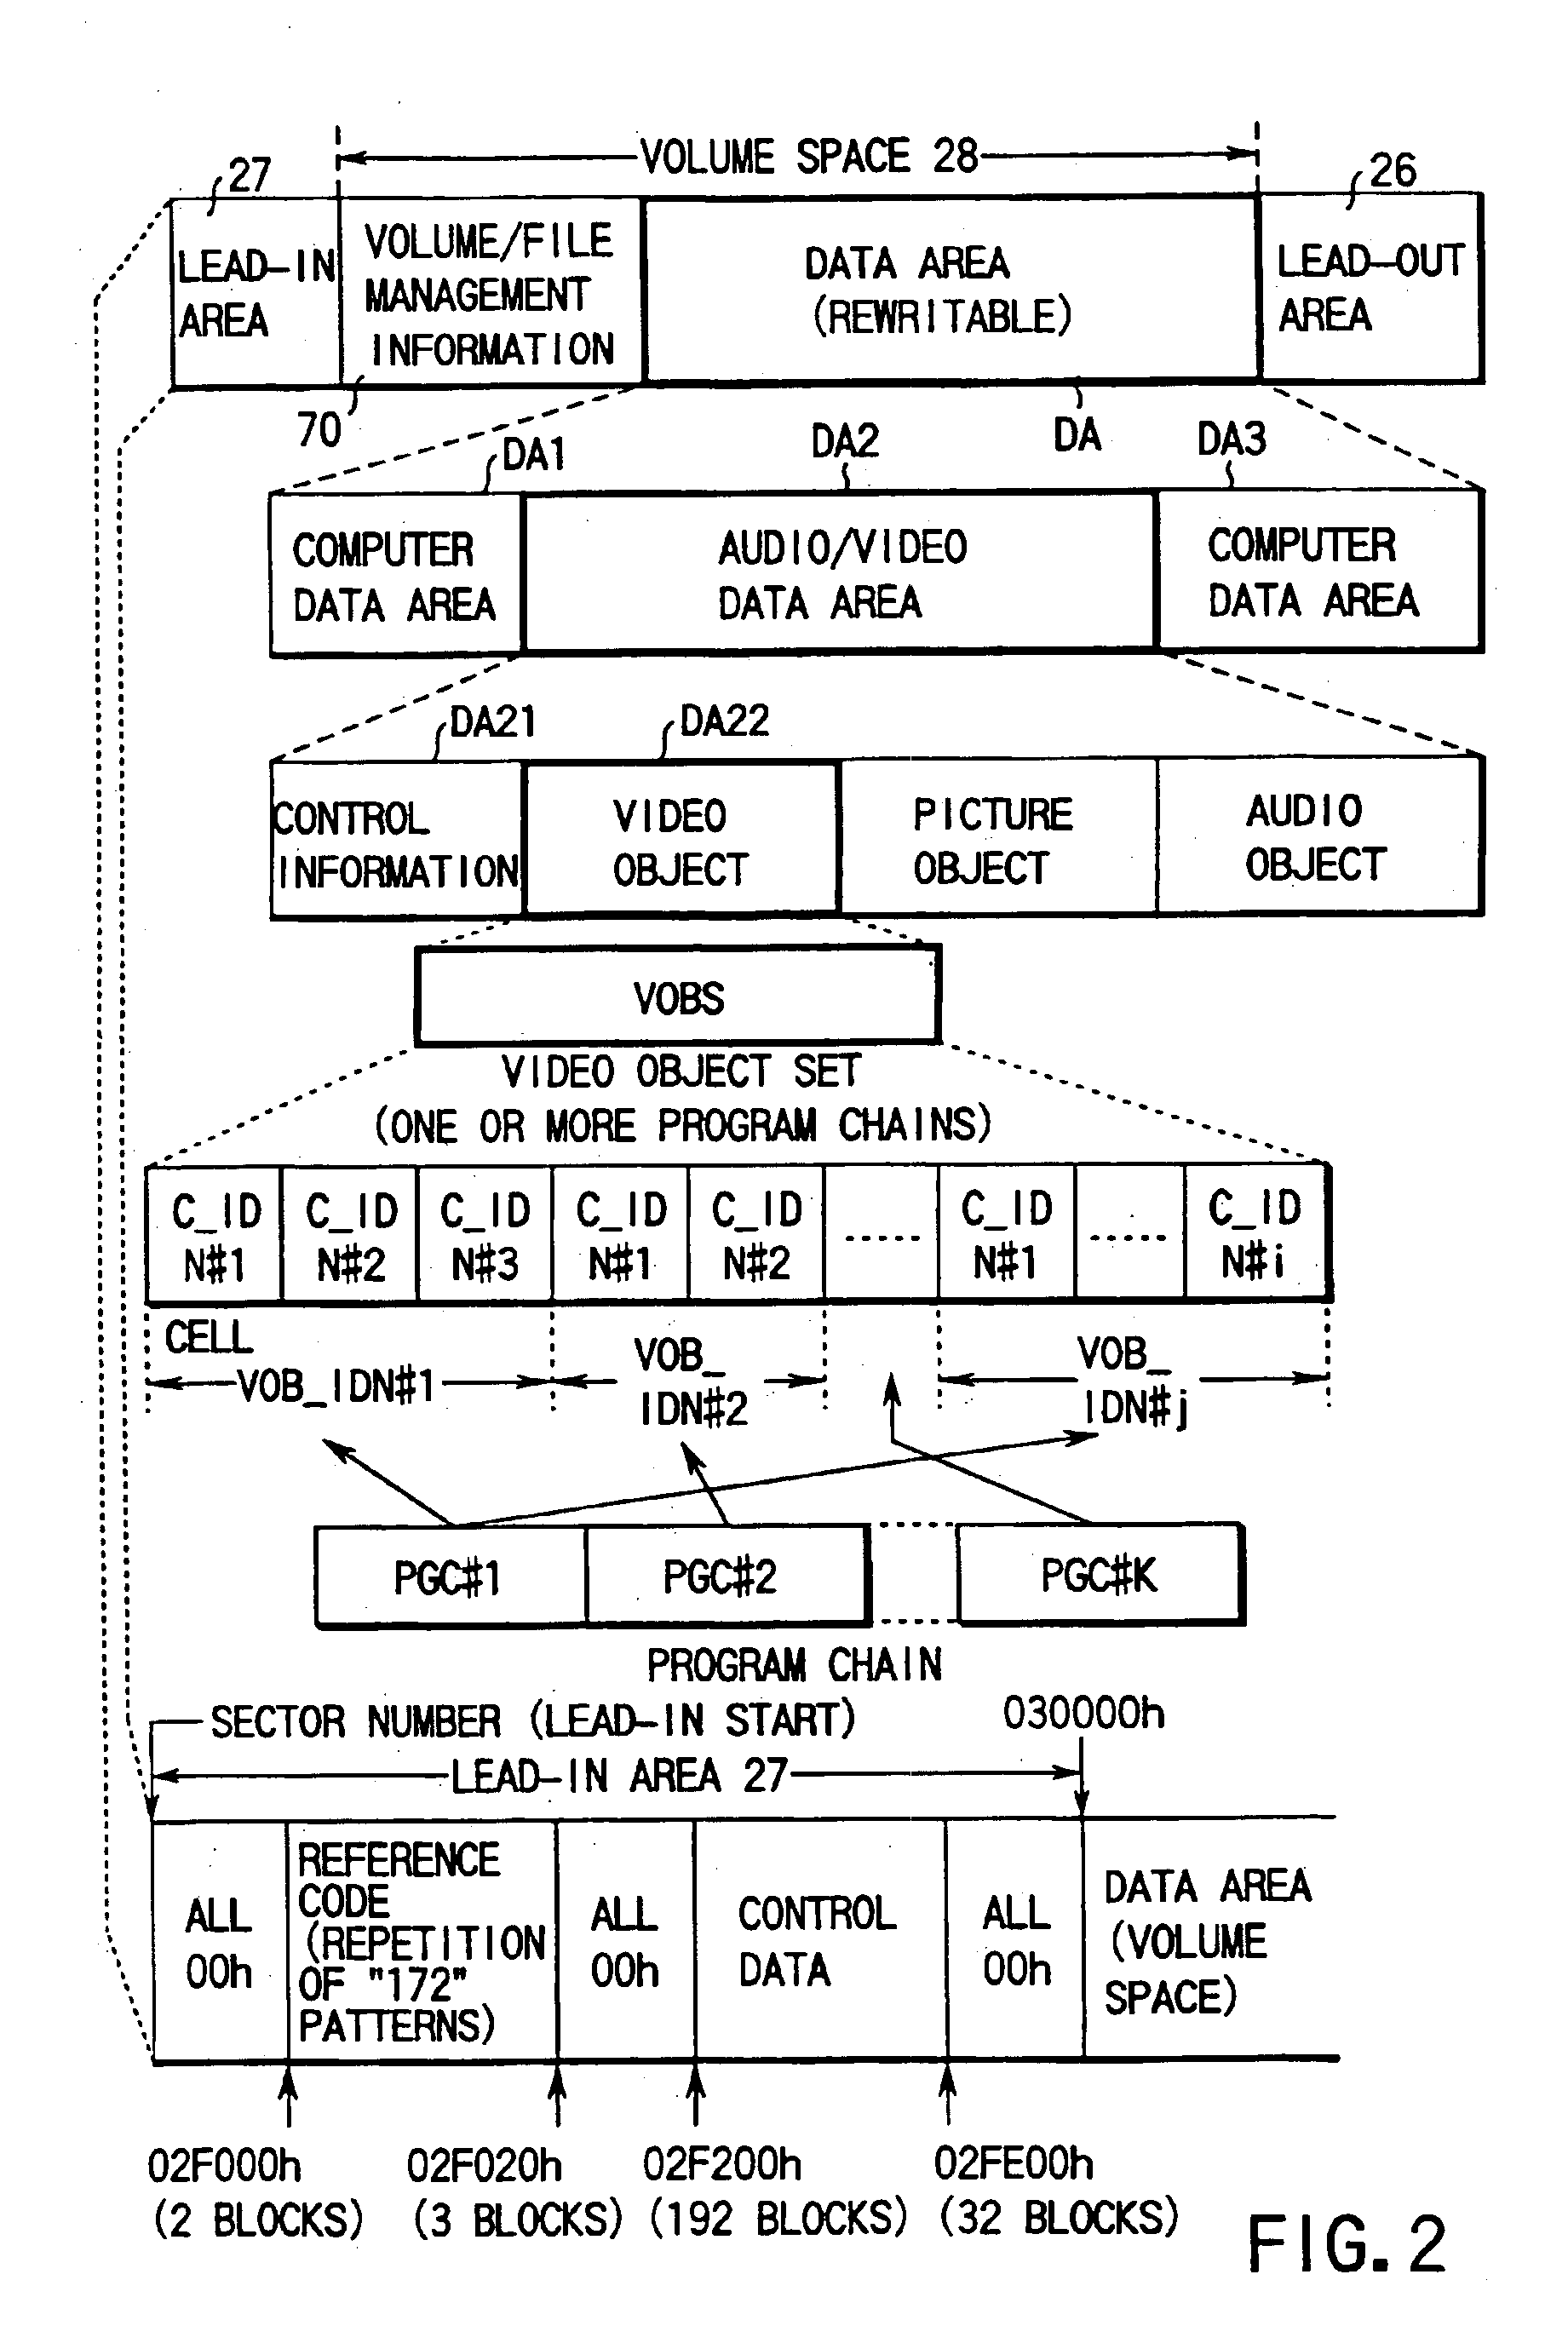 Digital video recording/playback system with entry point processing function